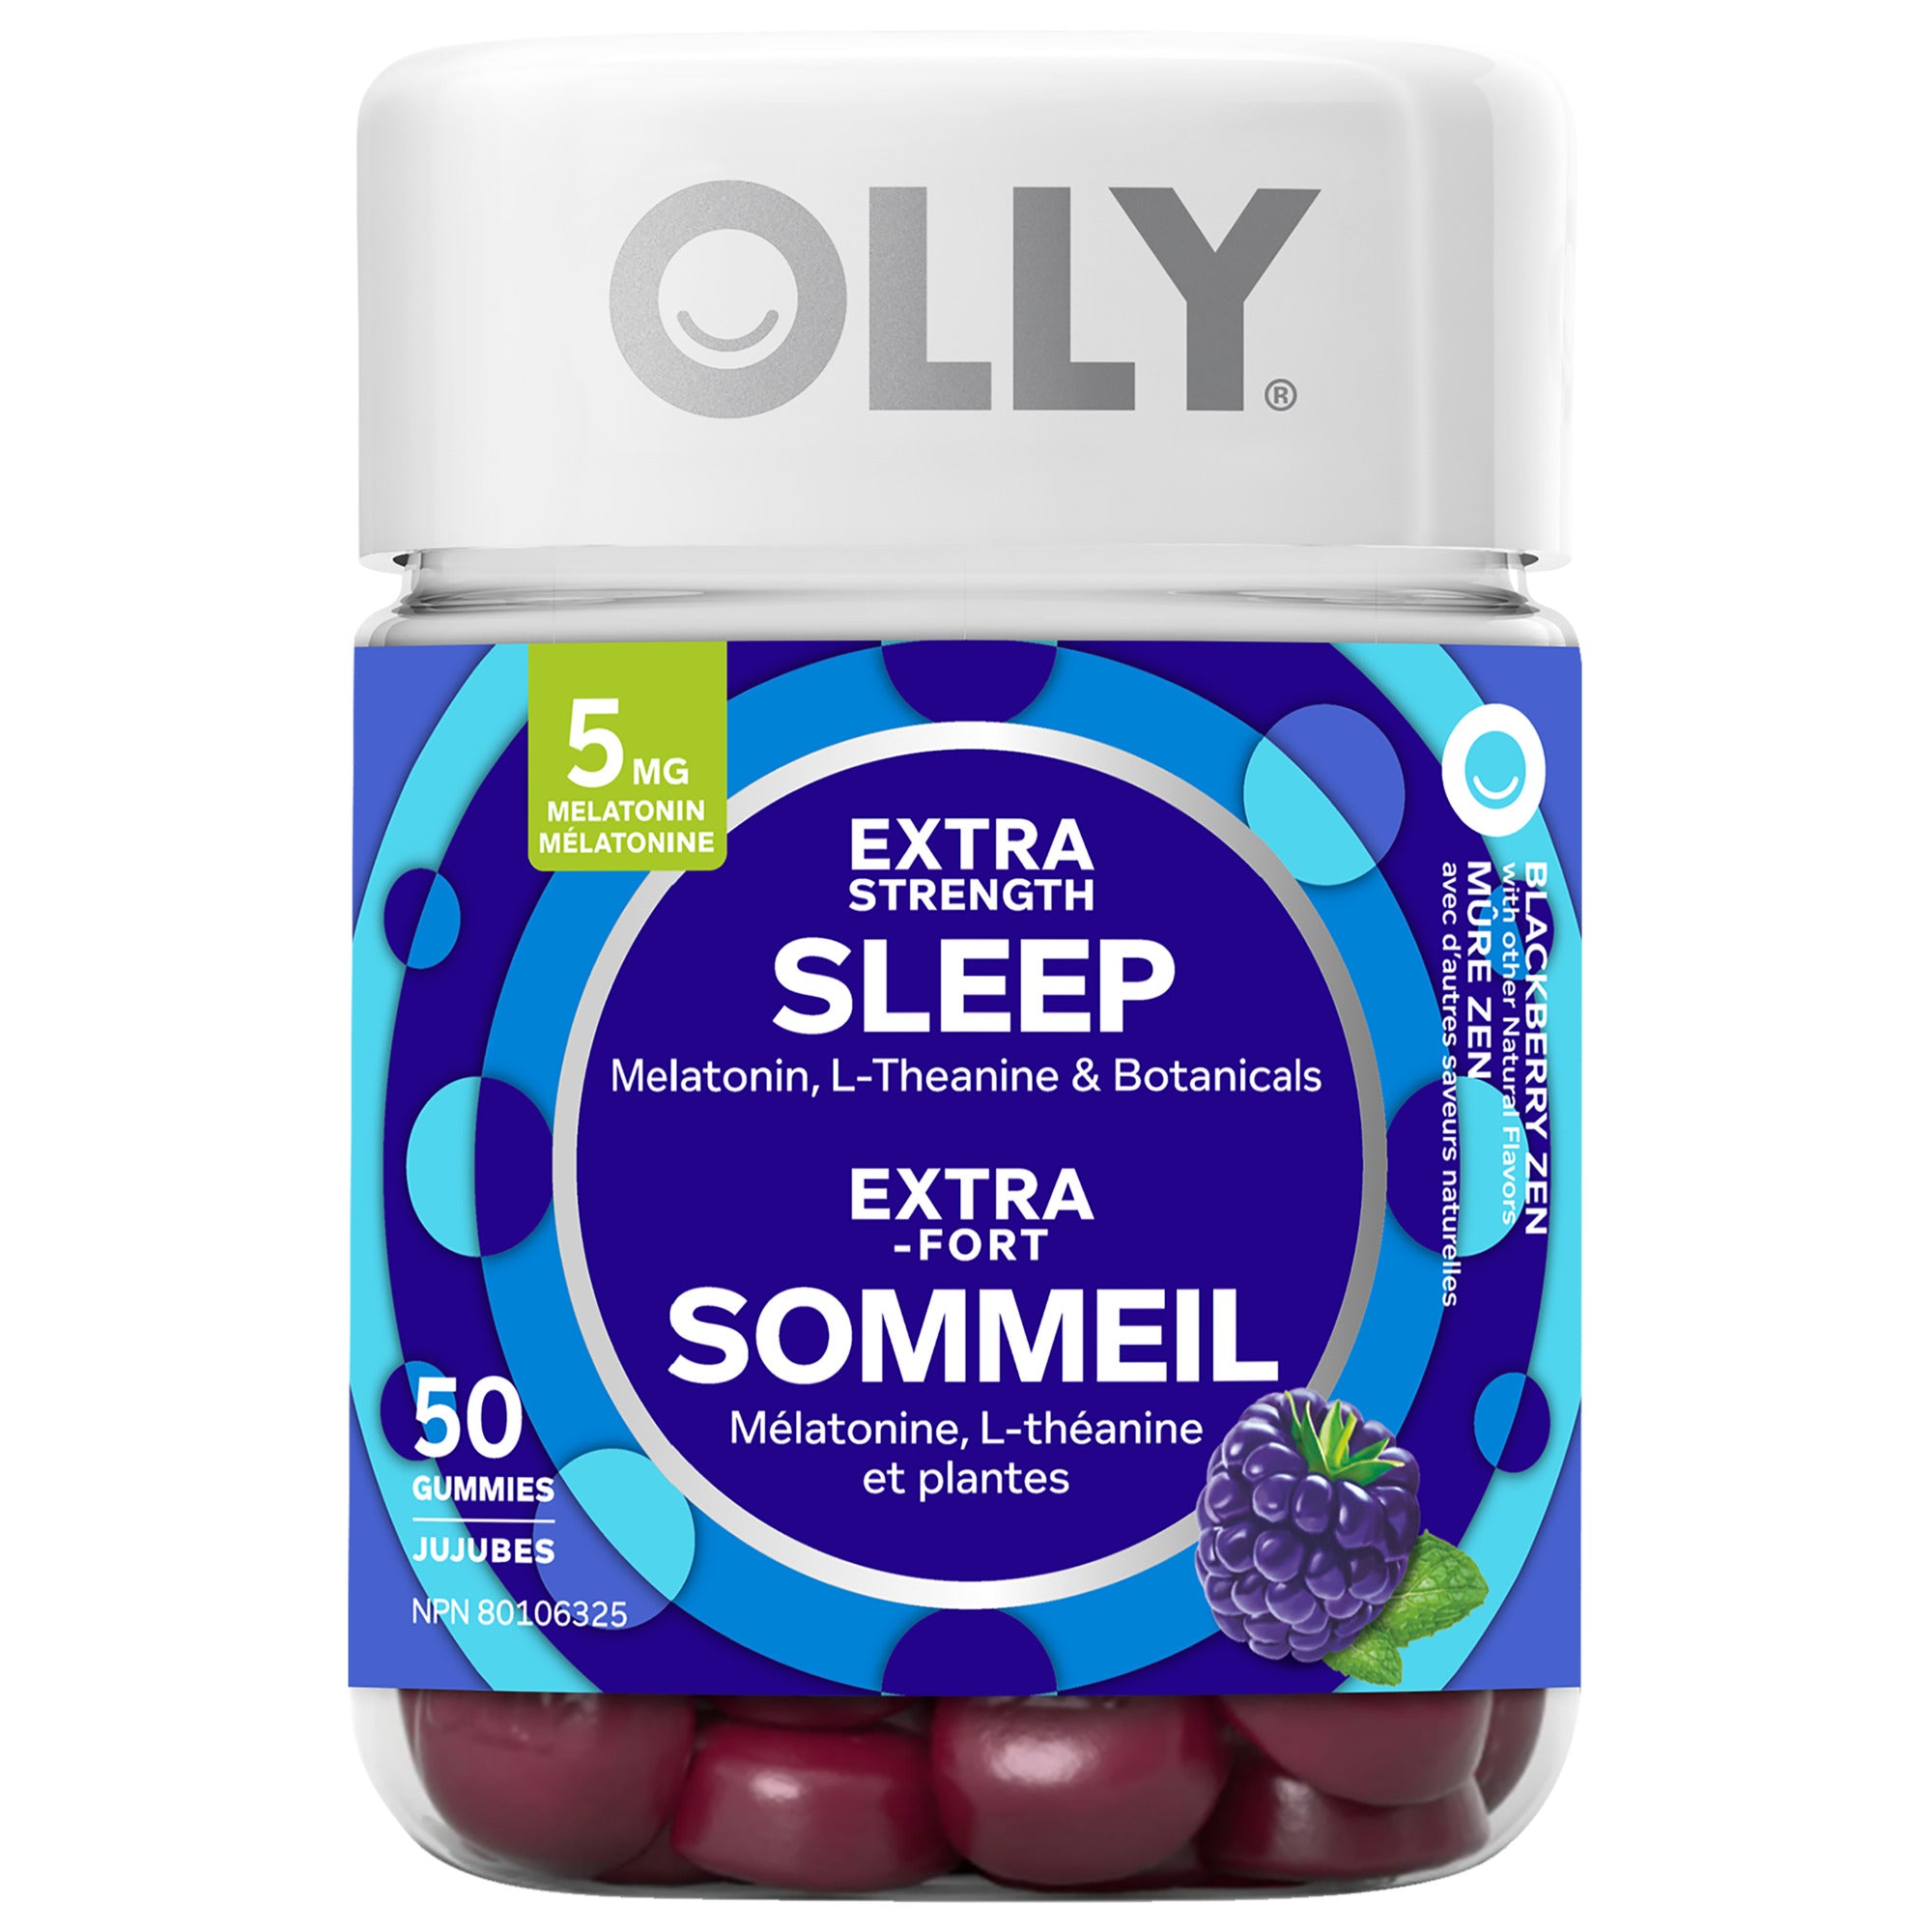 An image showing the frontside view of the OLLY® Extra Strength Sleep Gummy product packaging.